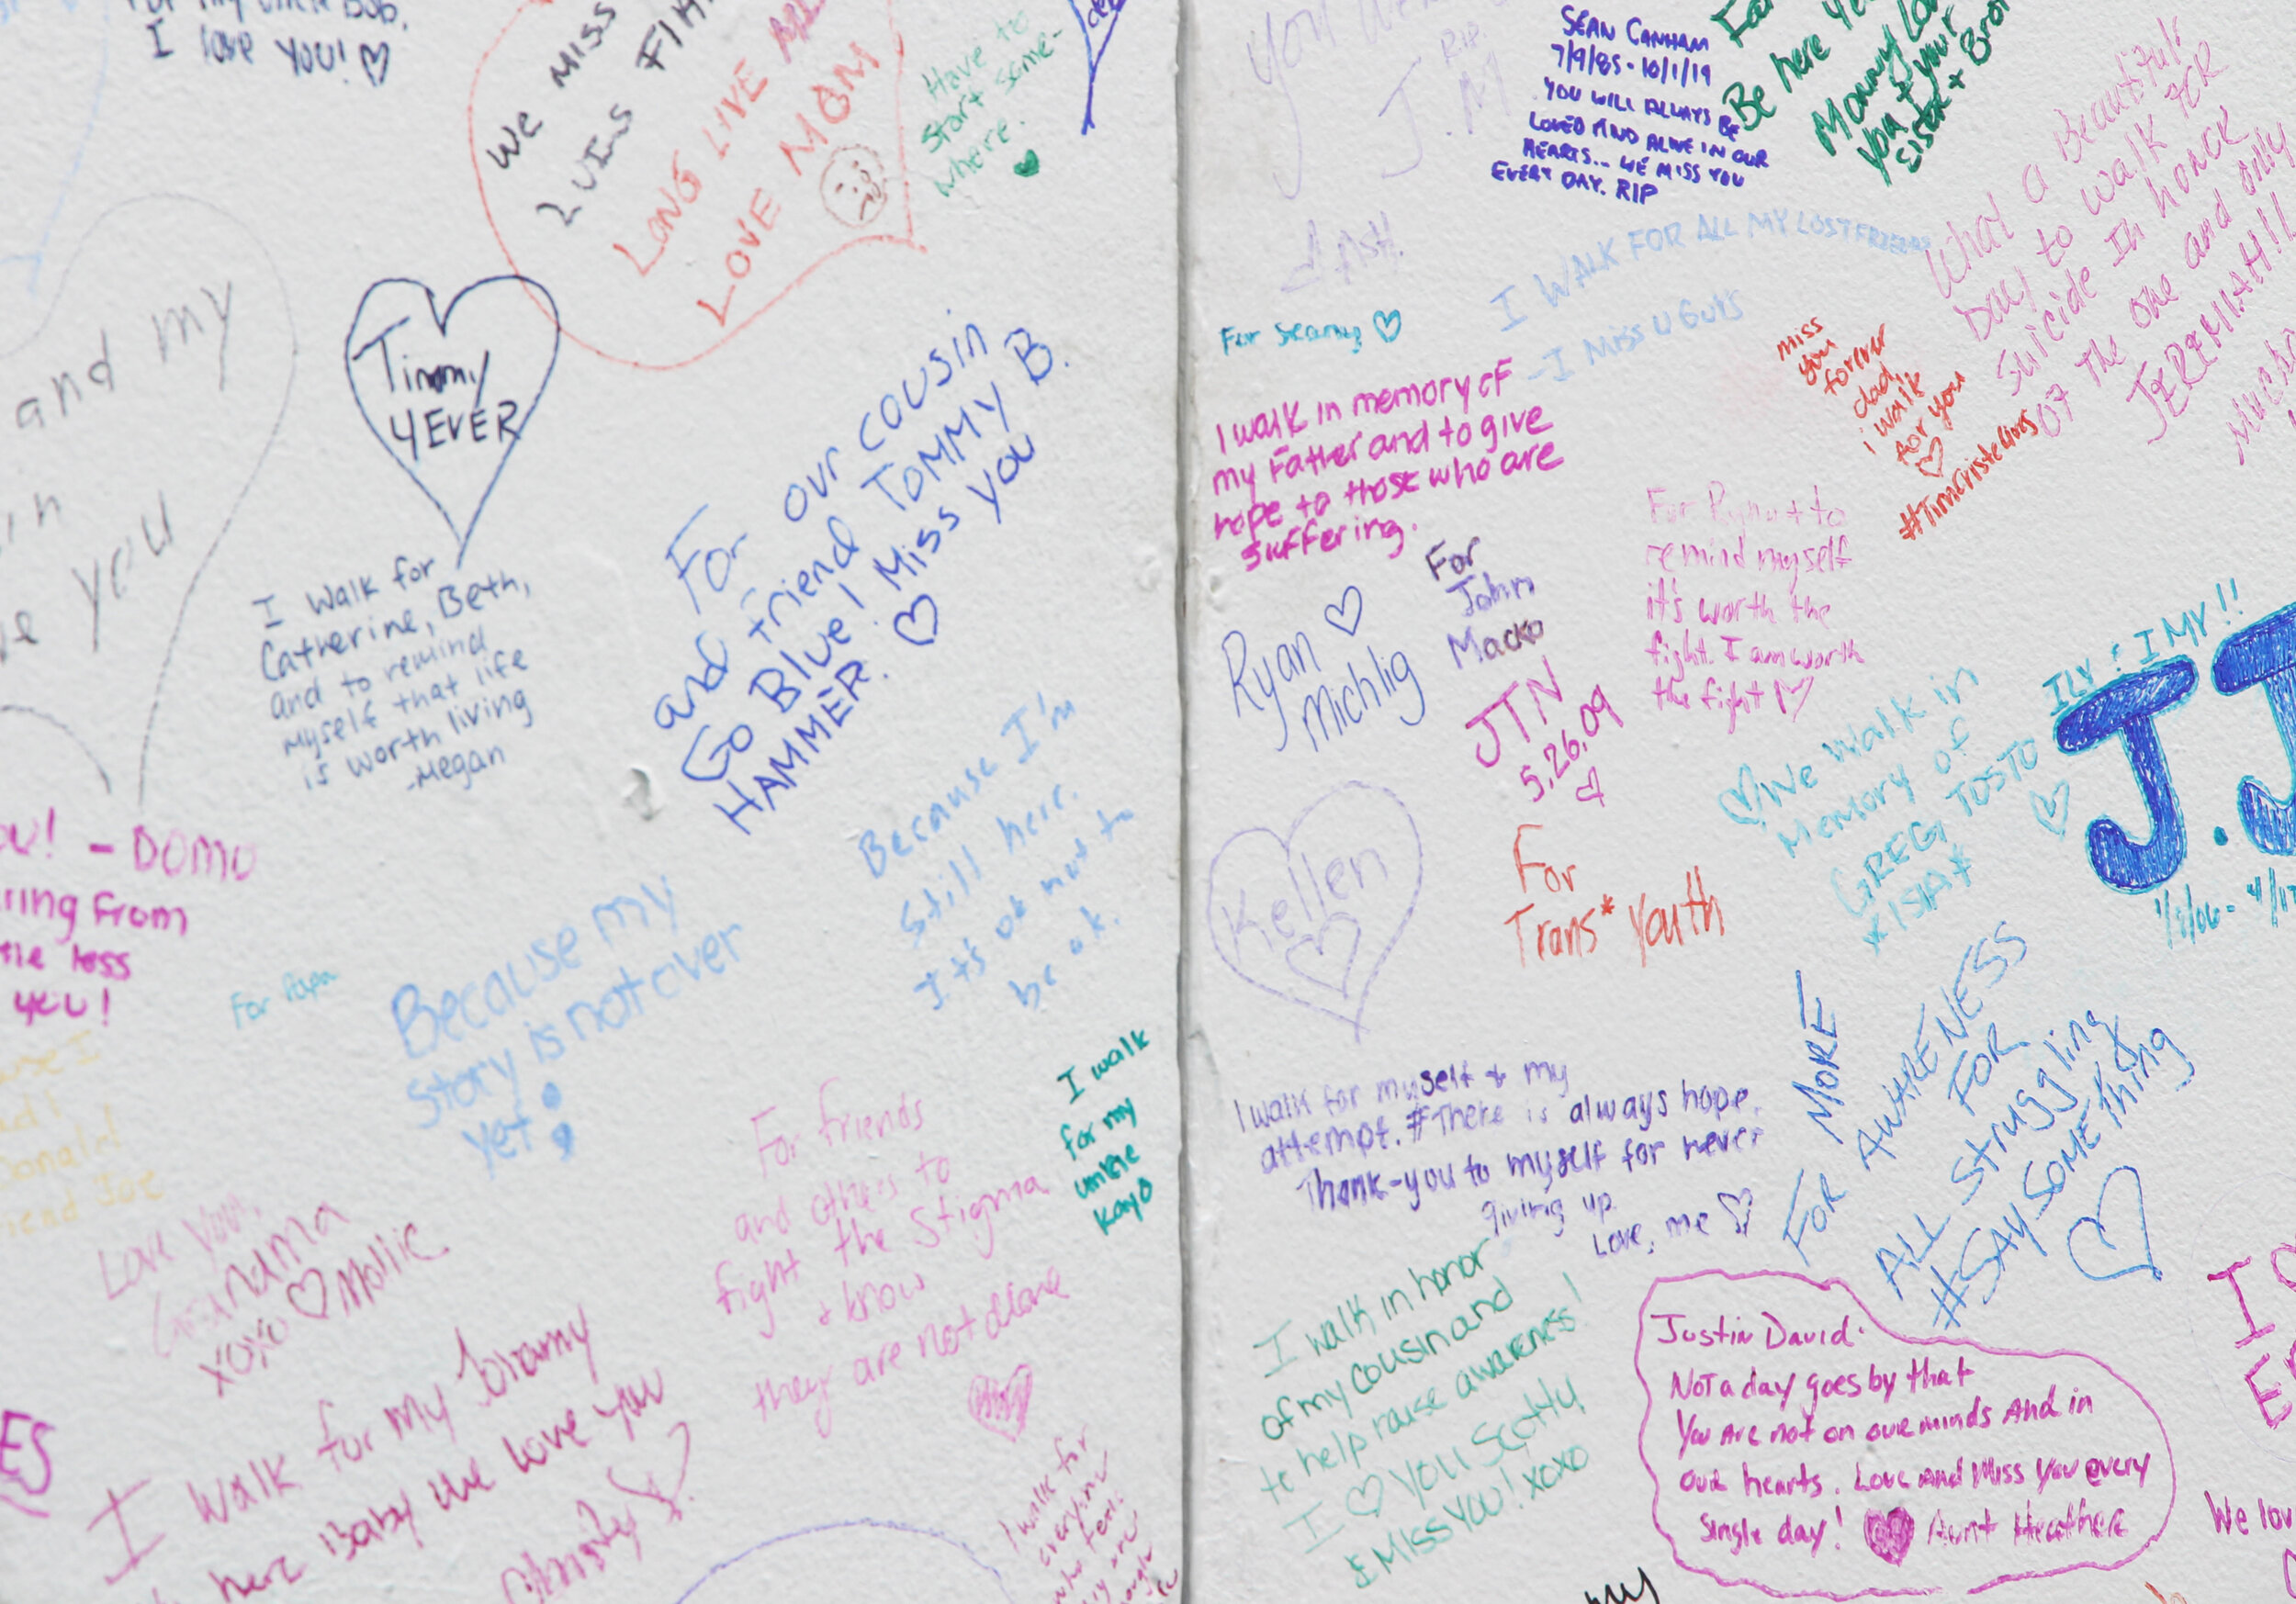  Participants wrote out their personal reasons for attending the walk in colorful messages on the  Why I Walk  wall. 